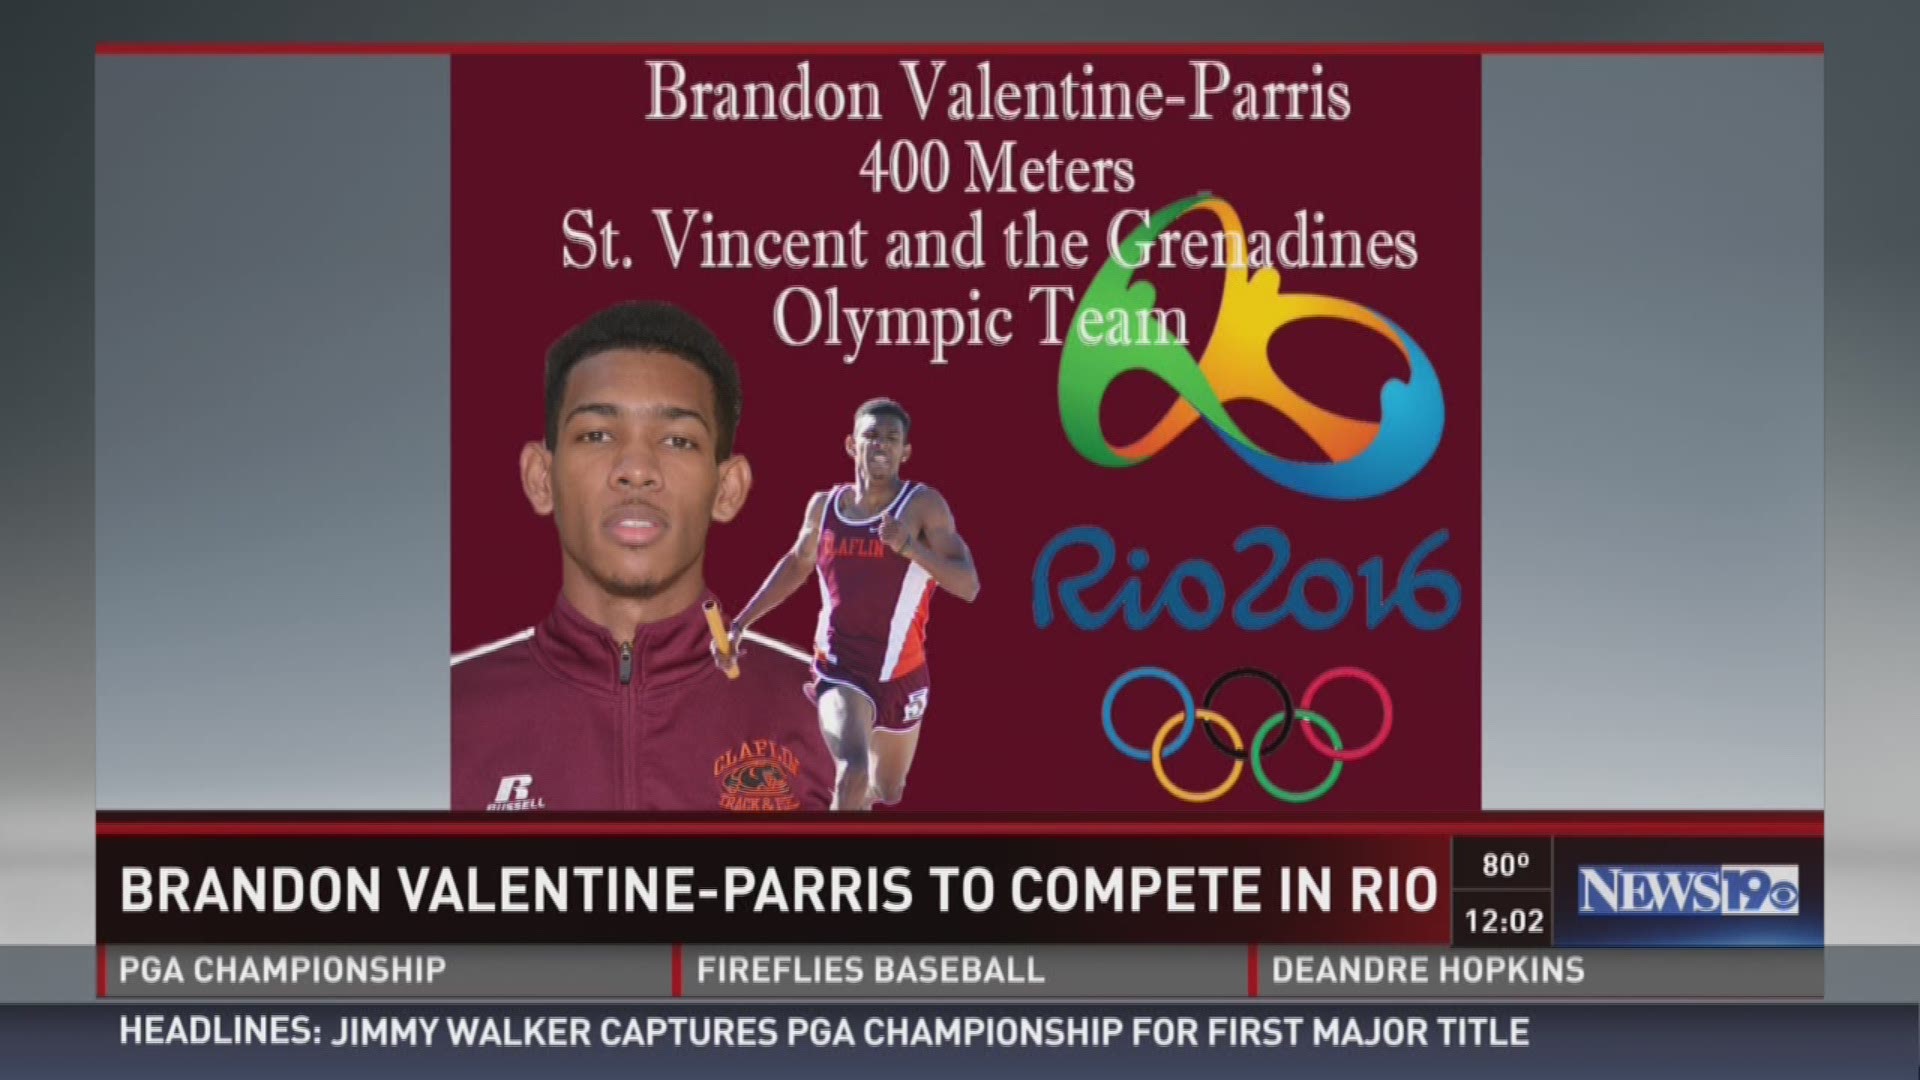 Claflin sprinter Brandon Valentine-Parris will compete in the 2016 Olympics.